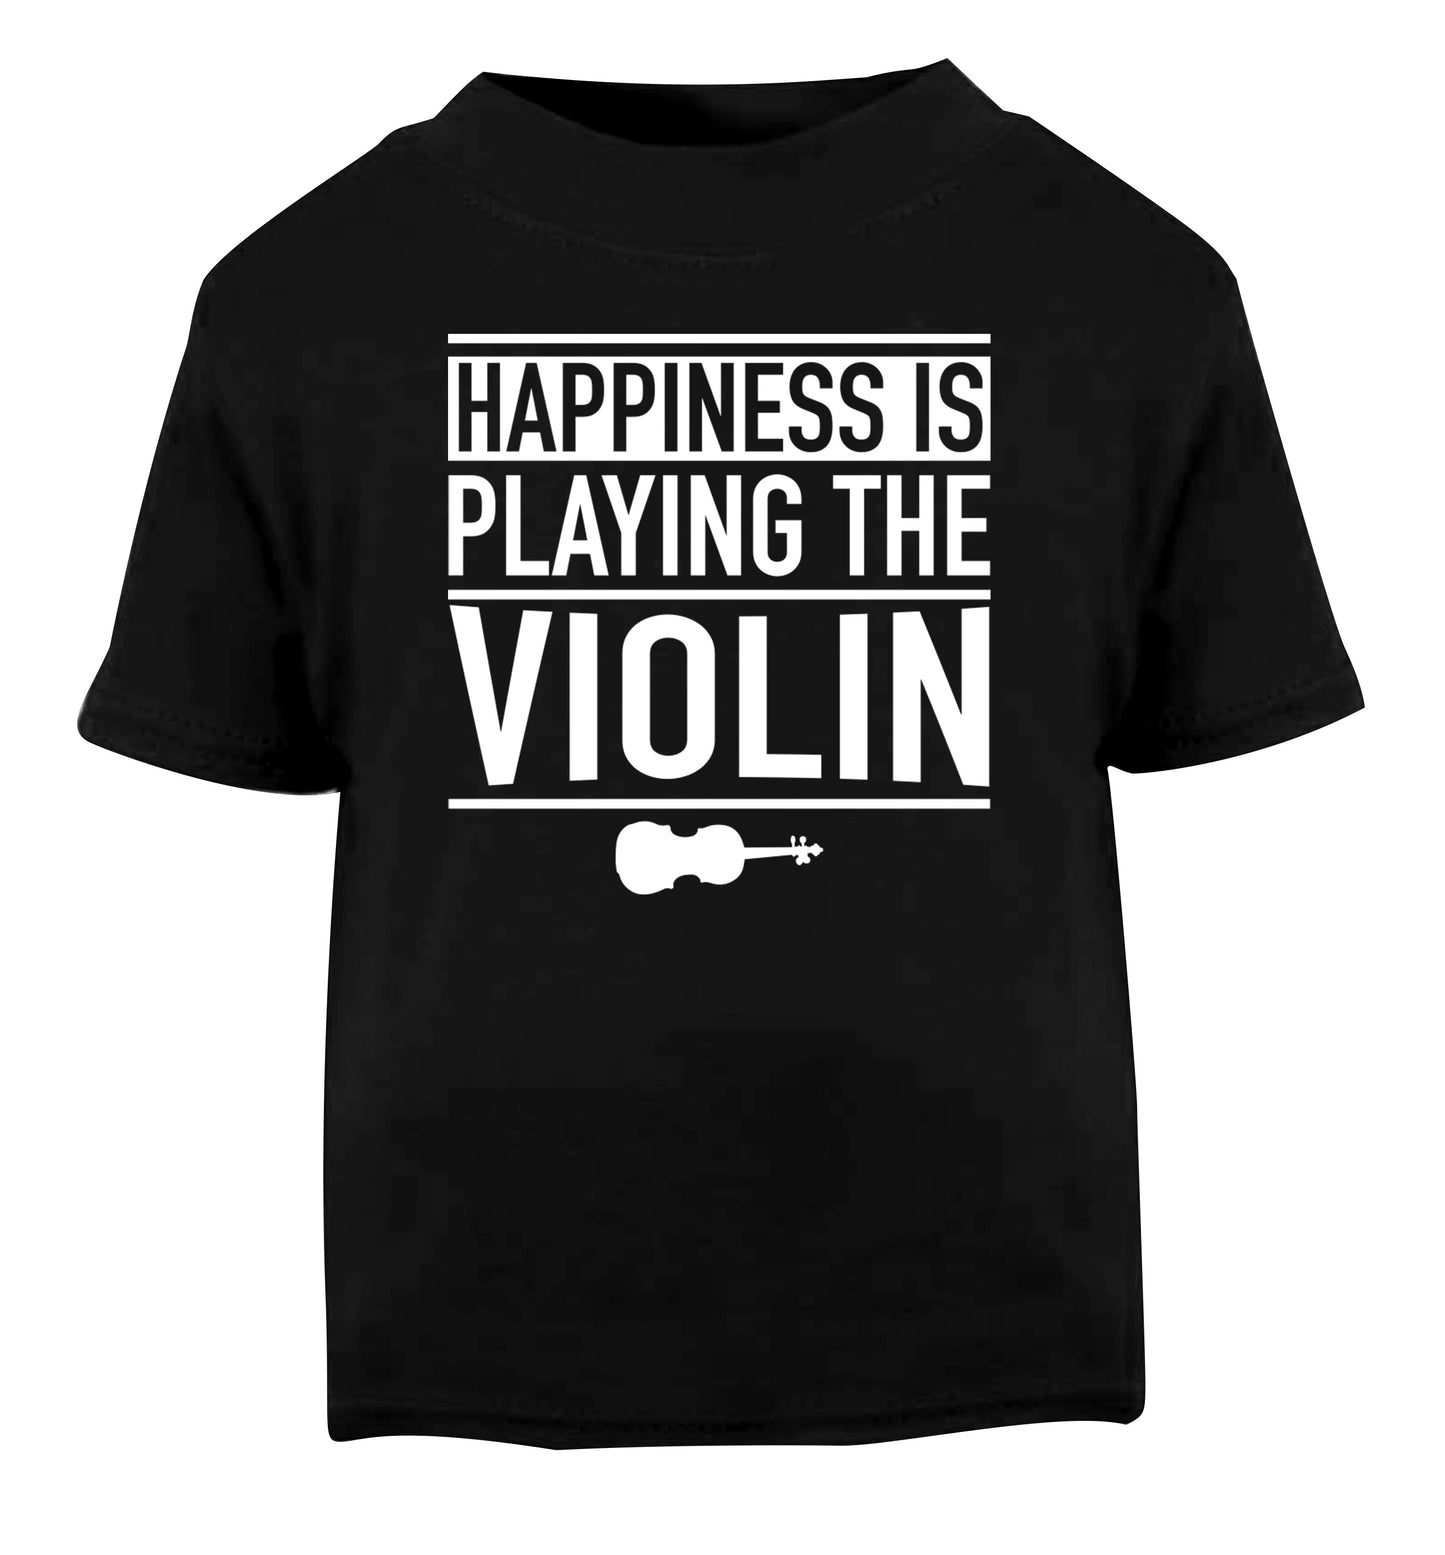 Happiness is playing the violin Black Baby Toddler Tshirt 2 years